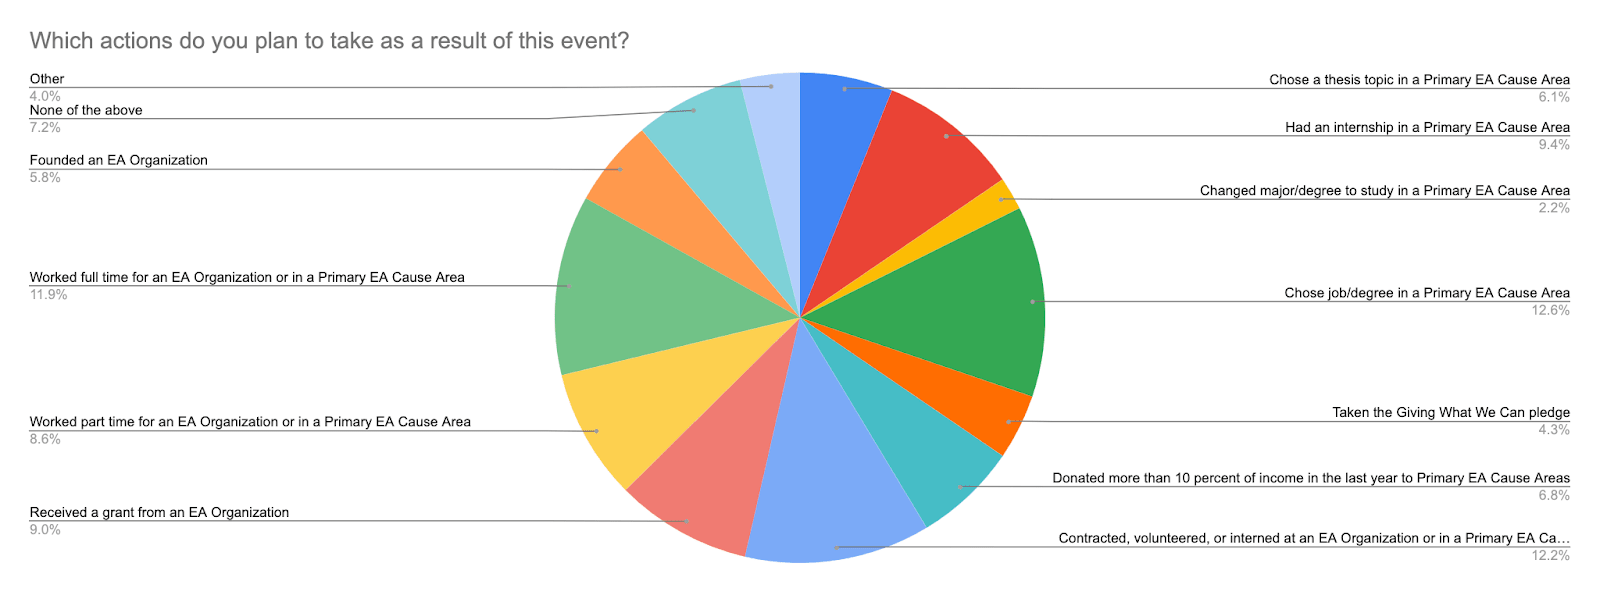 A pie chart showing the percent answers to the feedback survey question "Which actions do you plan to take as a result of this event?". The figures are available in a table in the  in the ‘Feedback survey results > Resulting actions’ section.